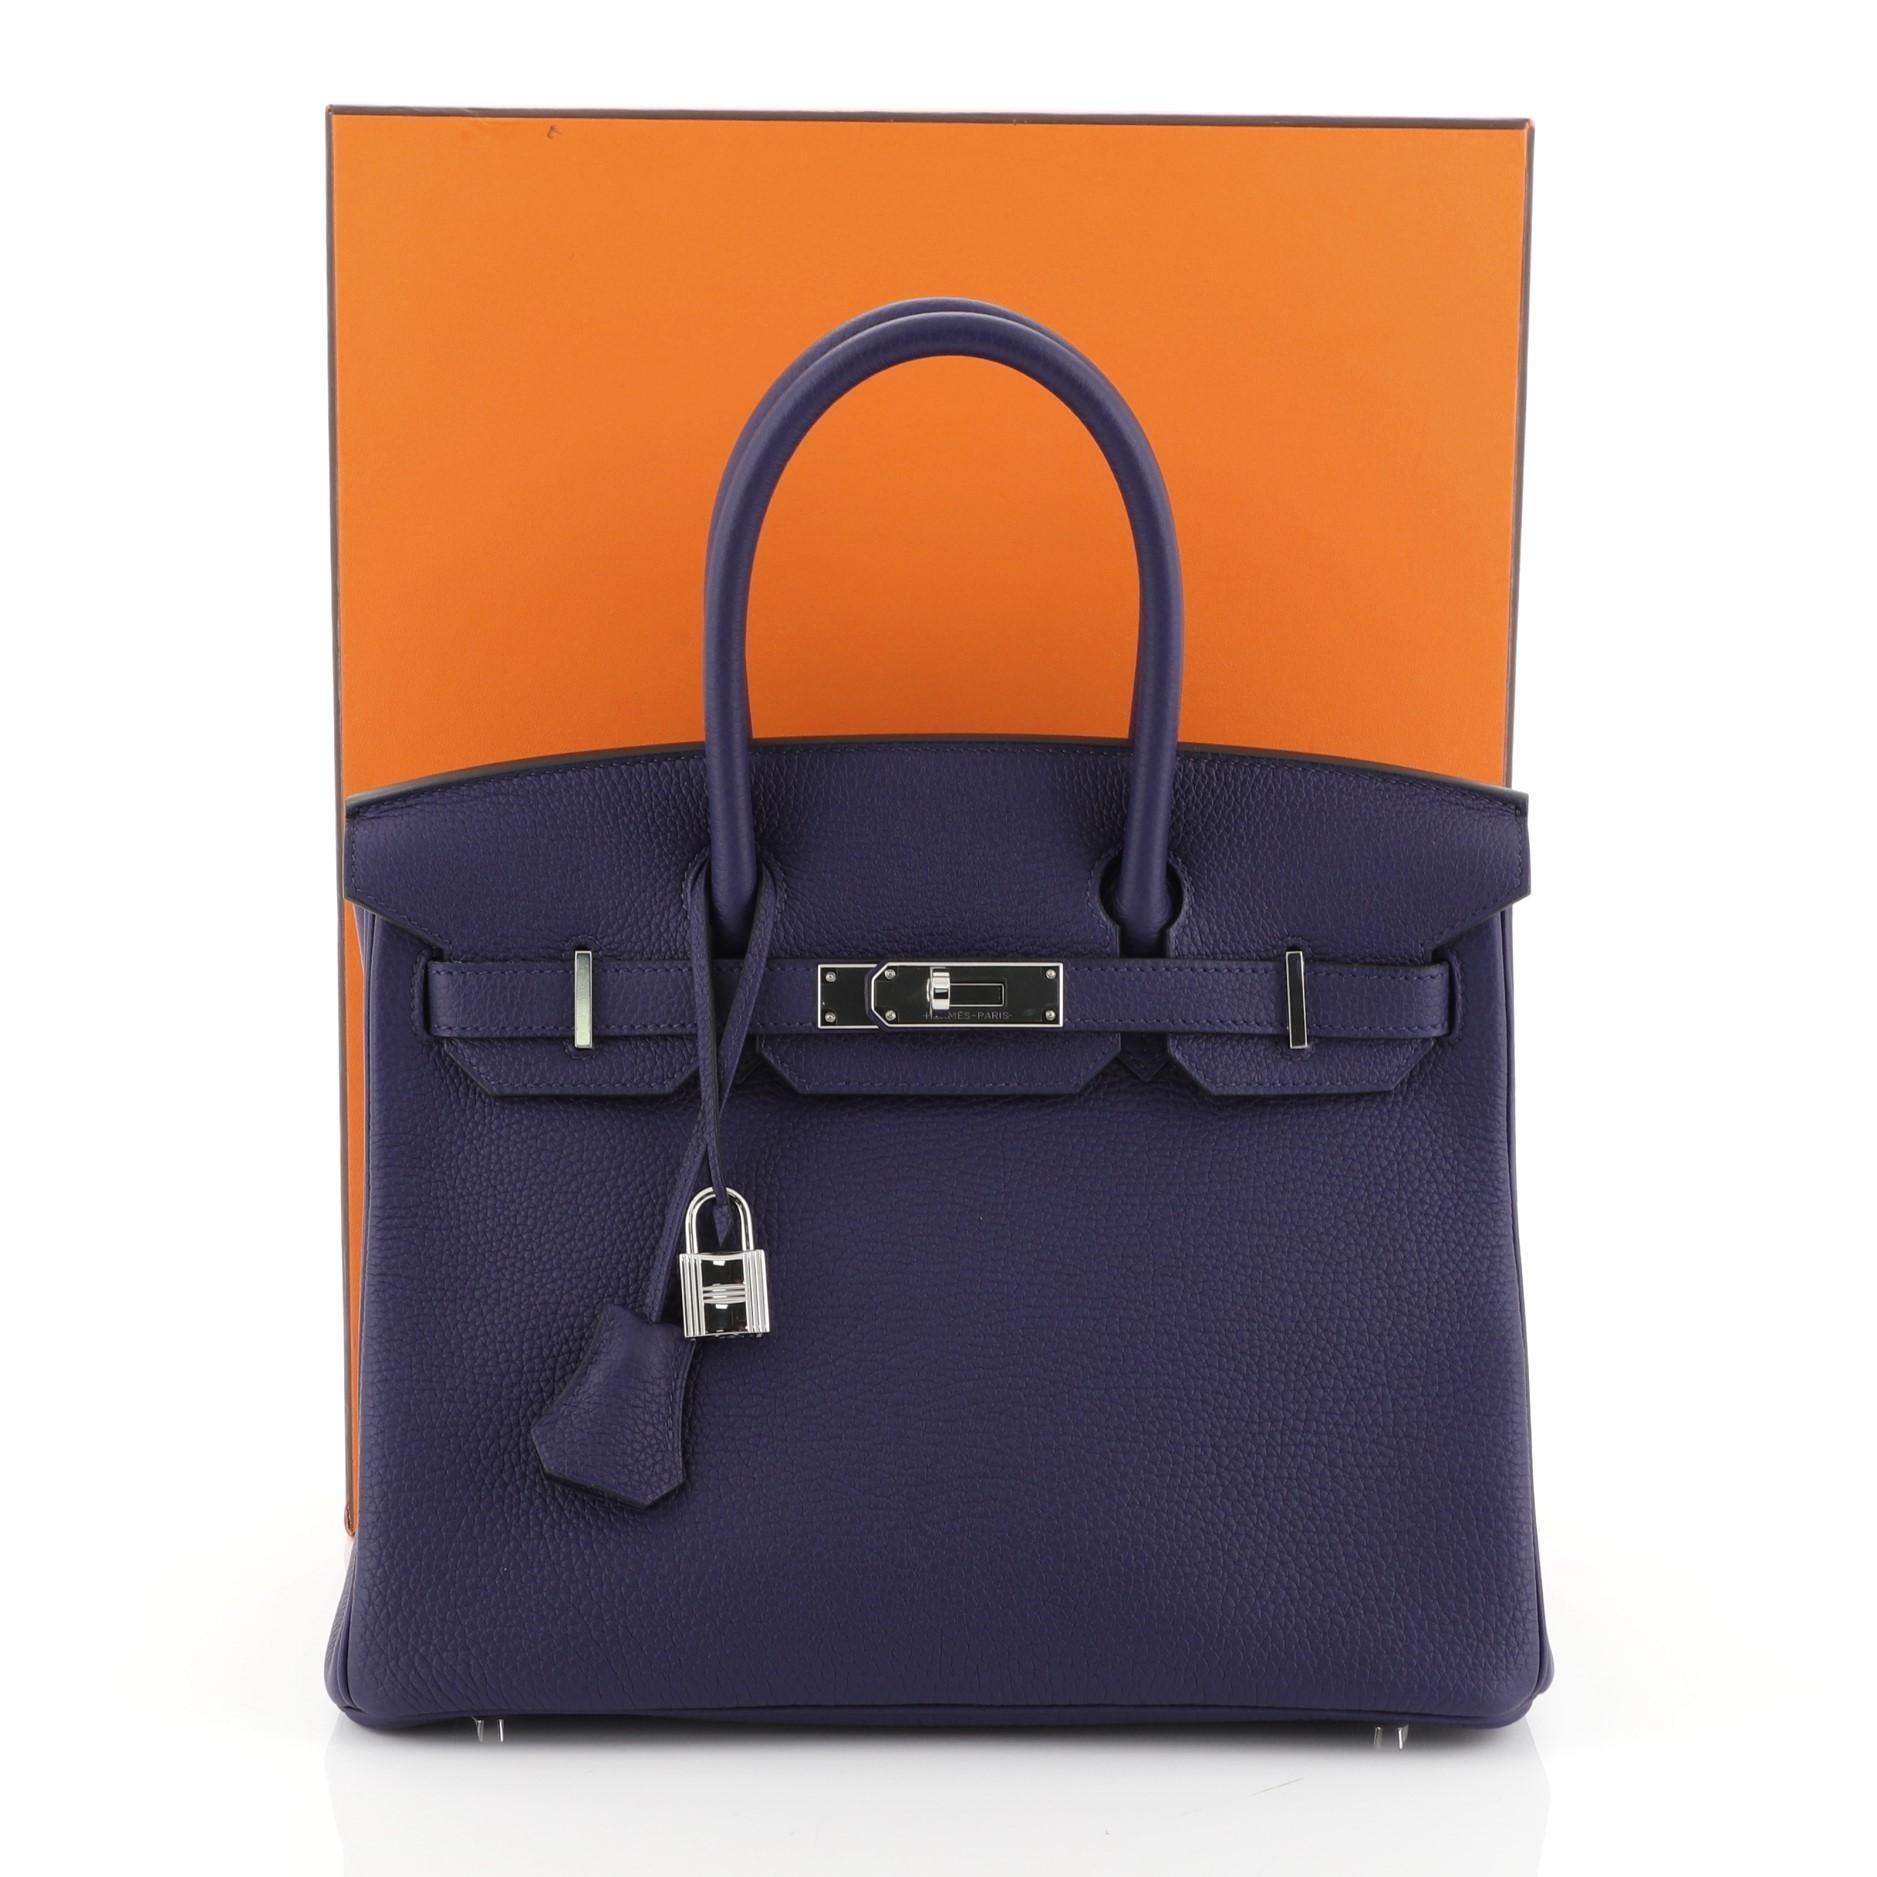 This Hermes Birkin Handbag Bleu Encre Togo with Palladium Hardware 30, crafted in Bleu Encre blue Togo leather, features dual rolled handles, frontal flap, and palladium hardware. Its turn-lock closure opens to a Bleu Encre blue Chevre leather